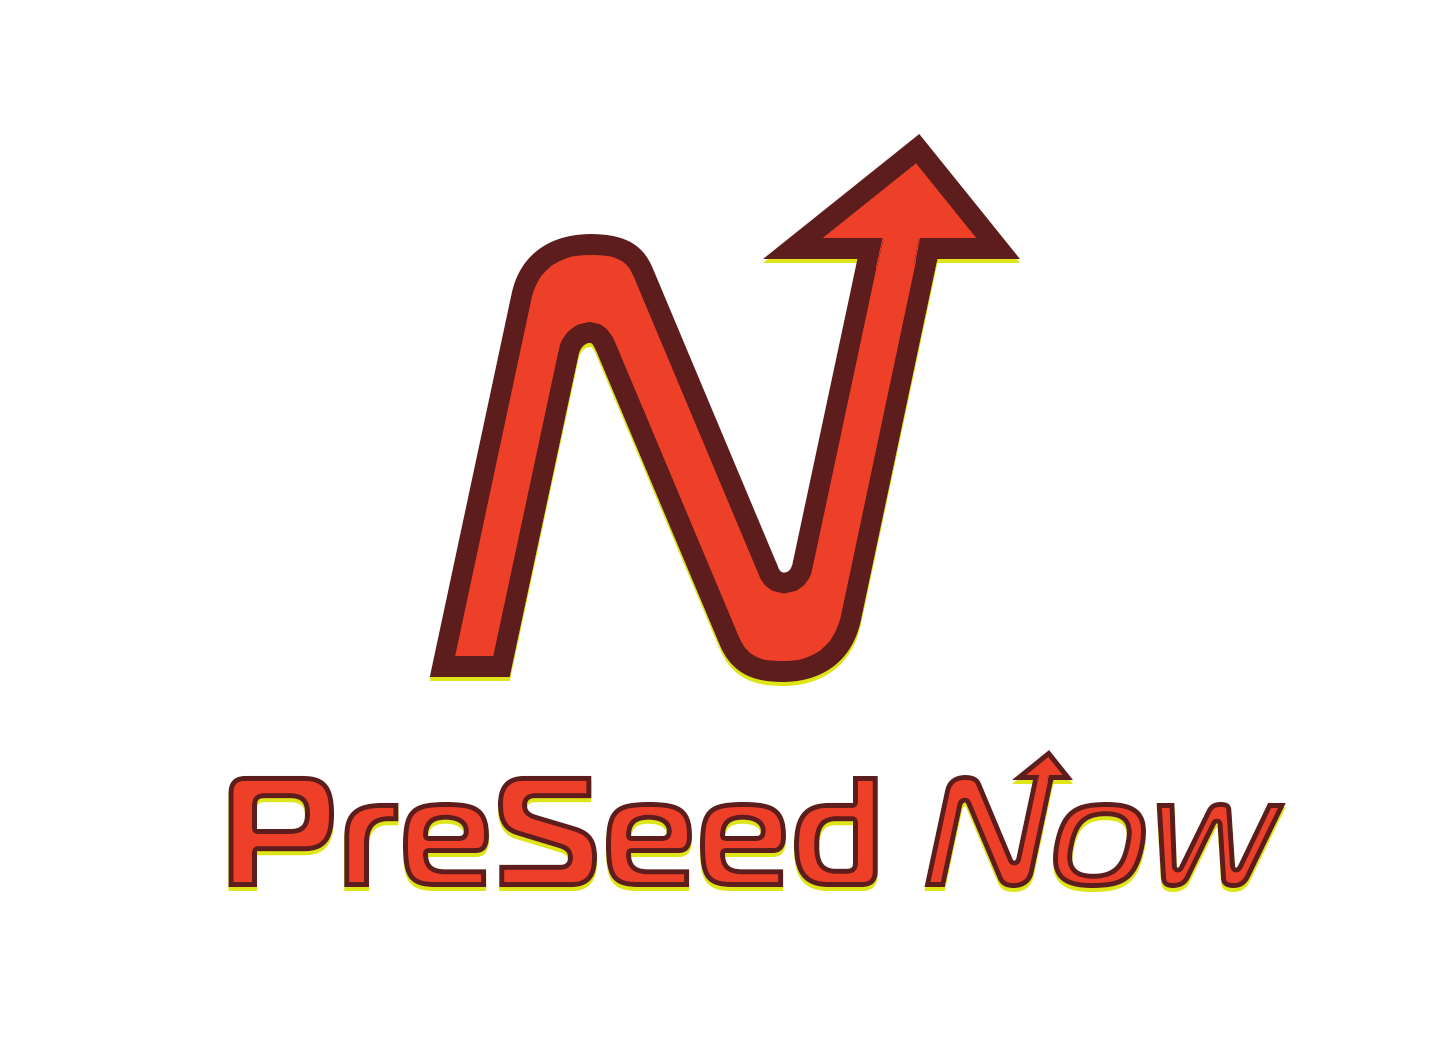 Introducing PreSeed Now - by Martin SFP Bryant